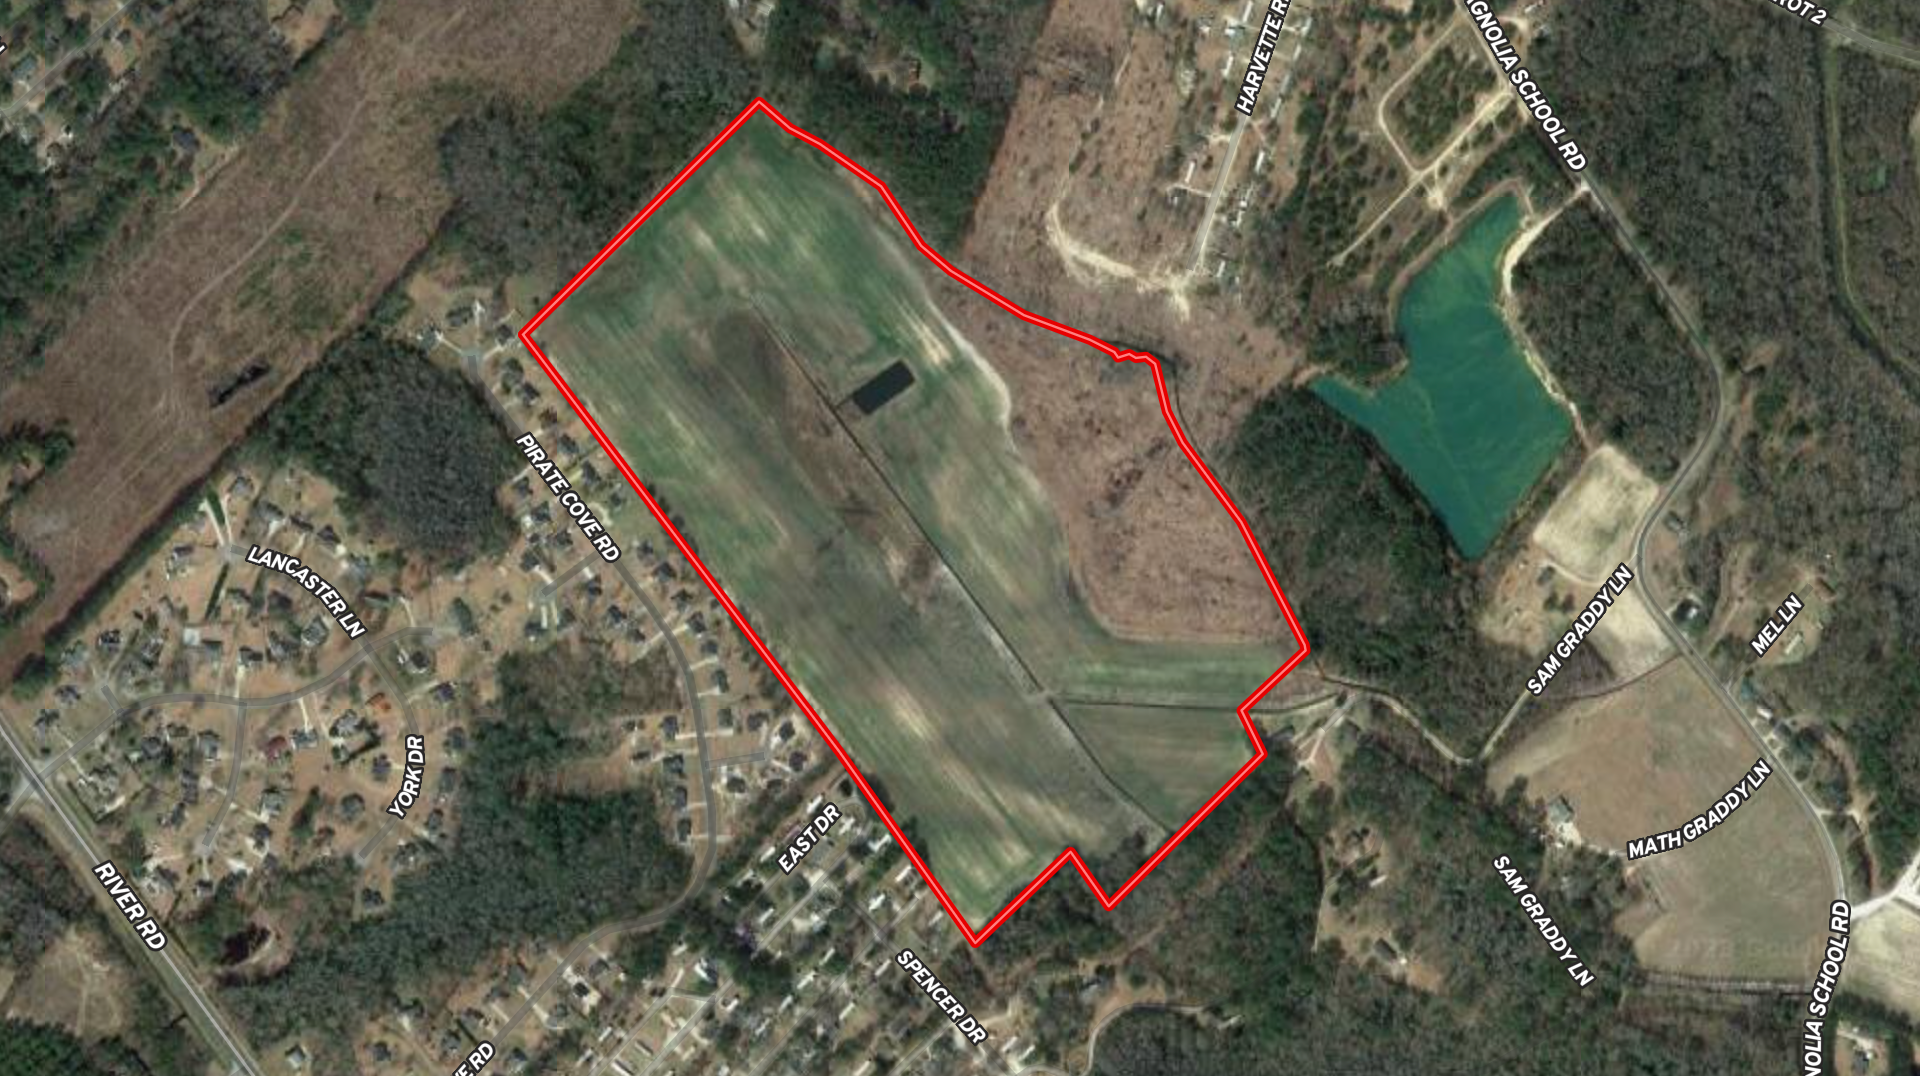 77-Acre Tract in Washington, NC: Ideal for Development or Sand Mining